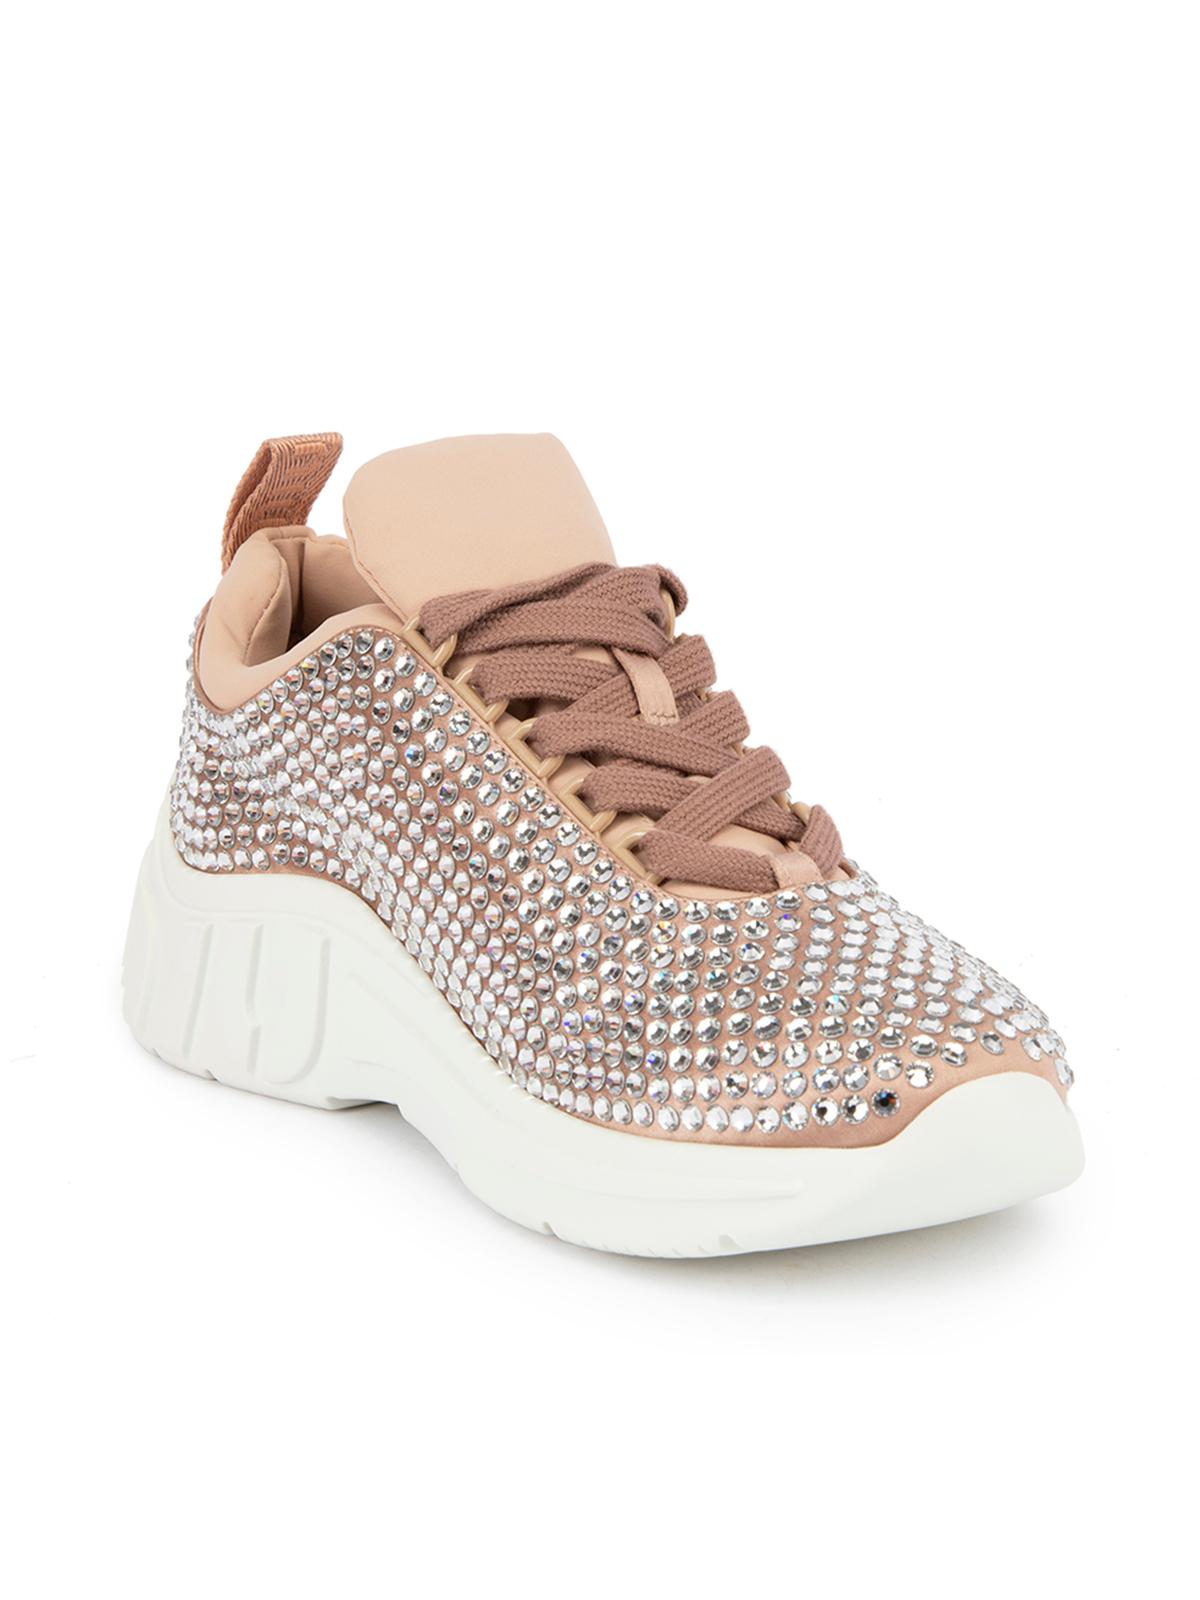 CONDITION is Never Worn. No visible wear to trainers is evident on this used Miu Miu designer resale item. This item comes with the original dustbags. Details Pink Cloth Sneakers Crystal embellishment all over Lace up Low top Round toe Platform heel